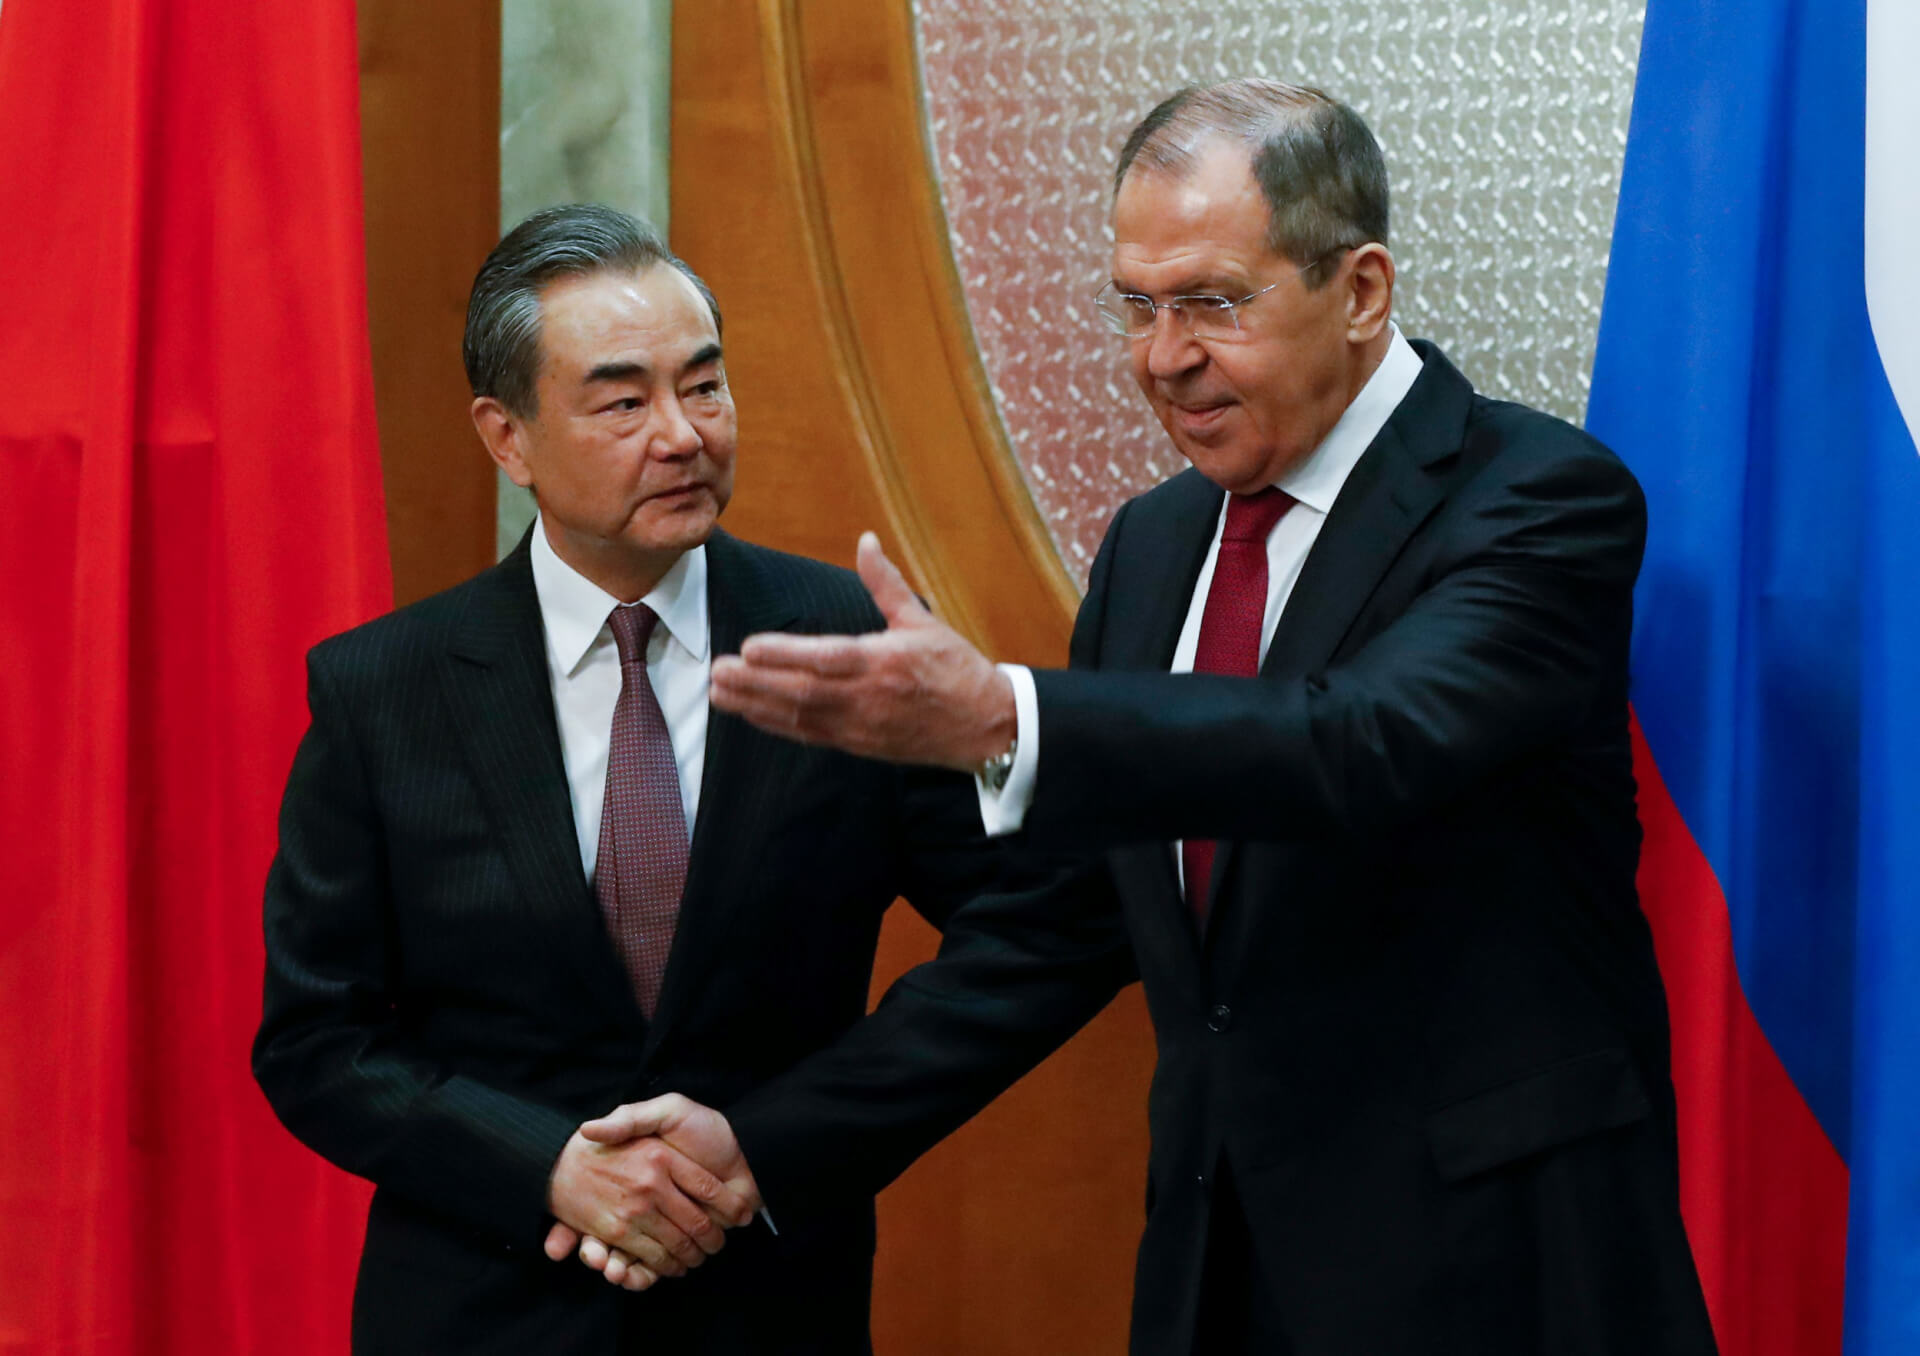 Chinese FM Wang Yi Says Russia and China Must Work Together In Negotiating With Taliban